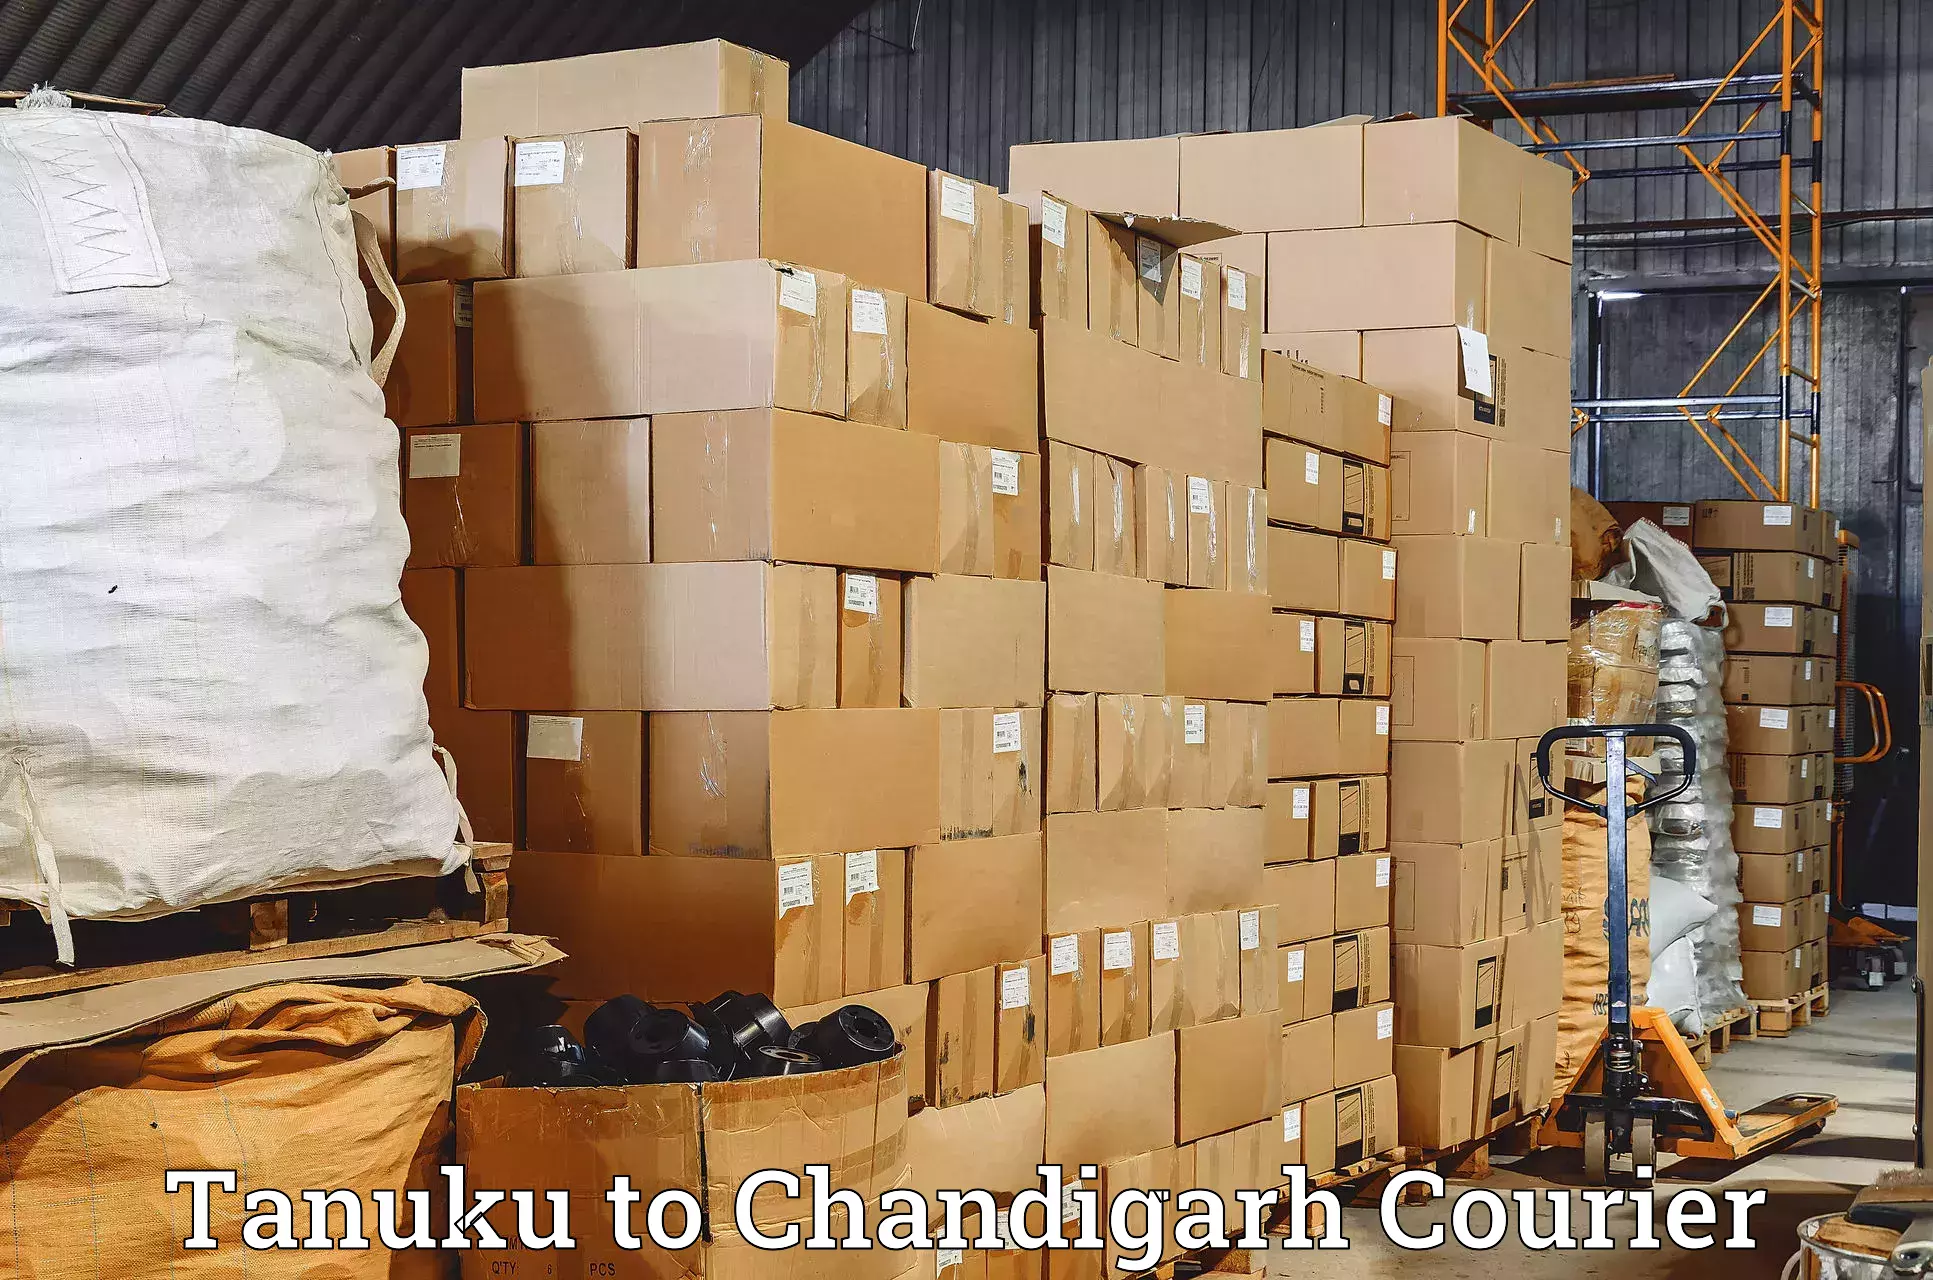 Subscription-based courier Tanuku to Chandigarh